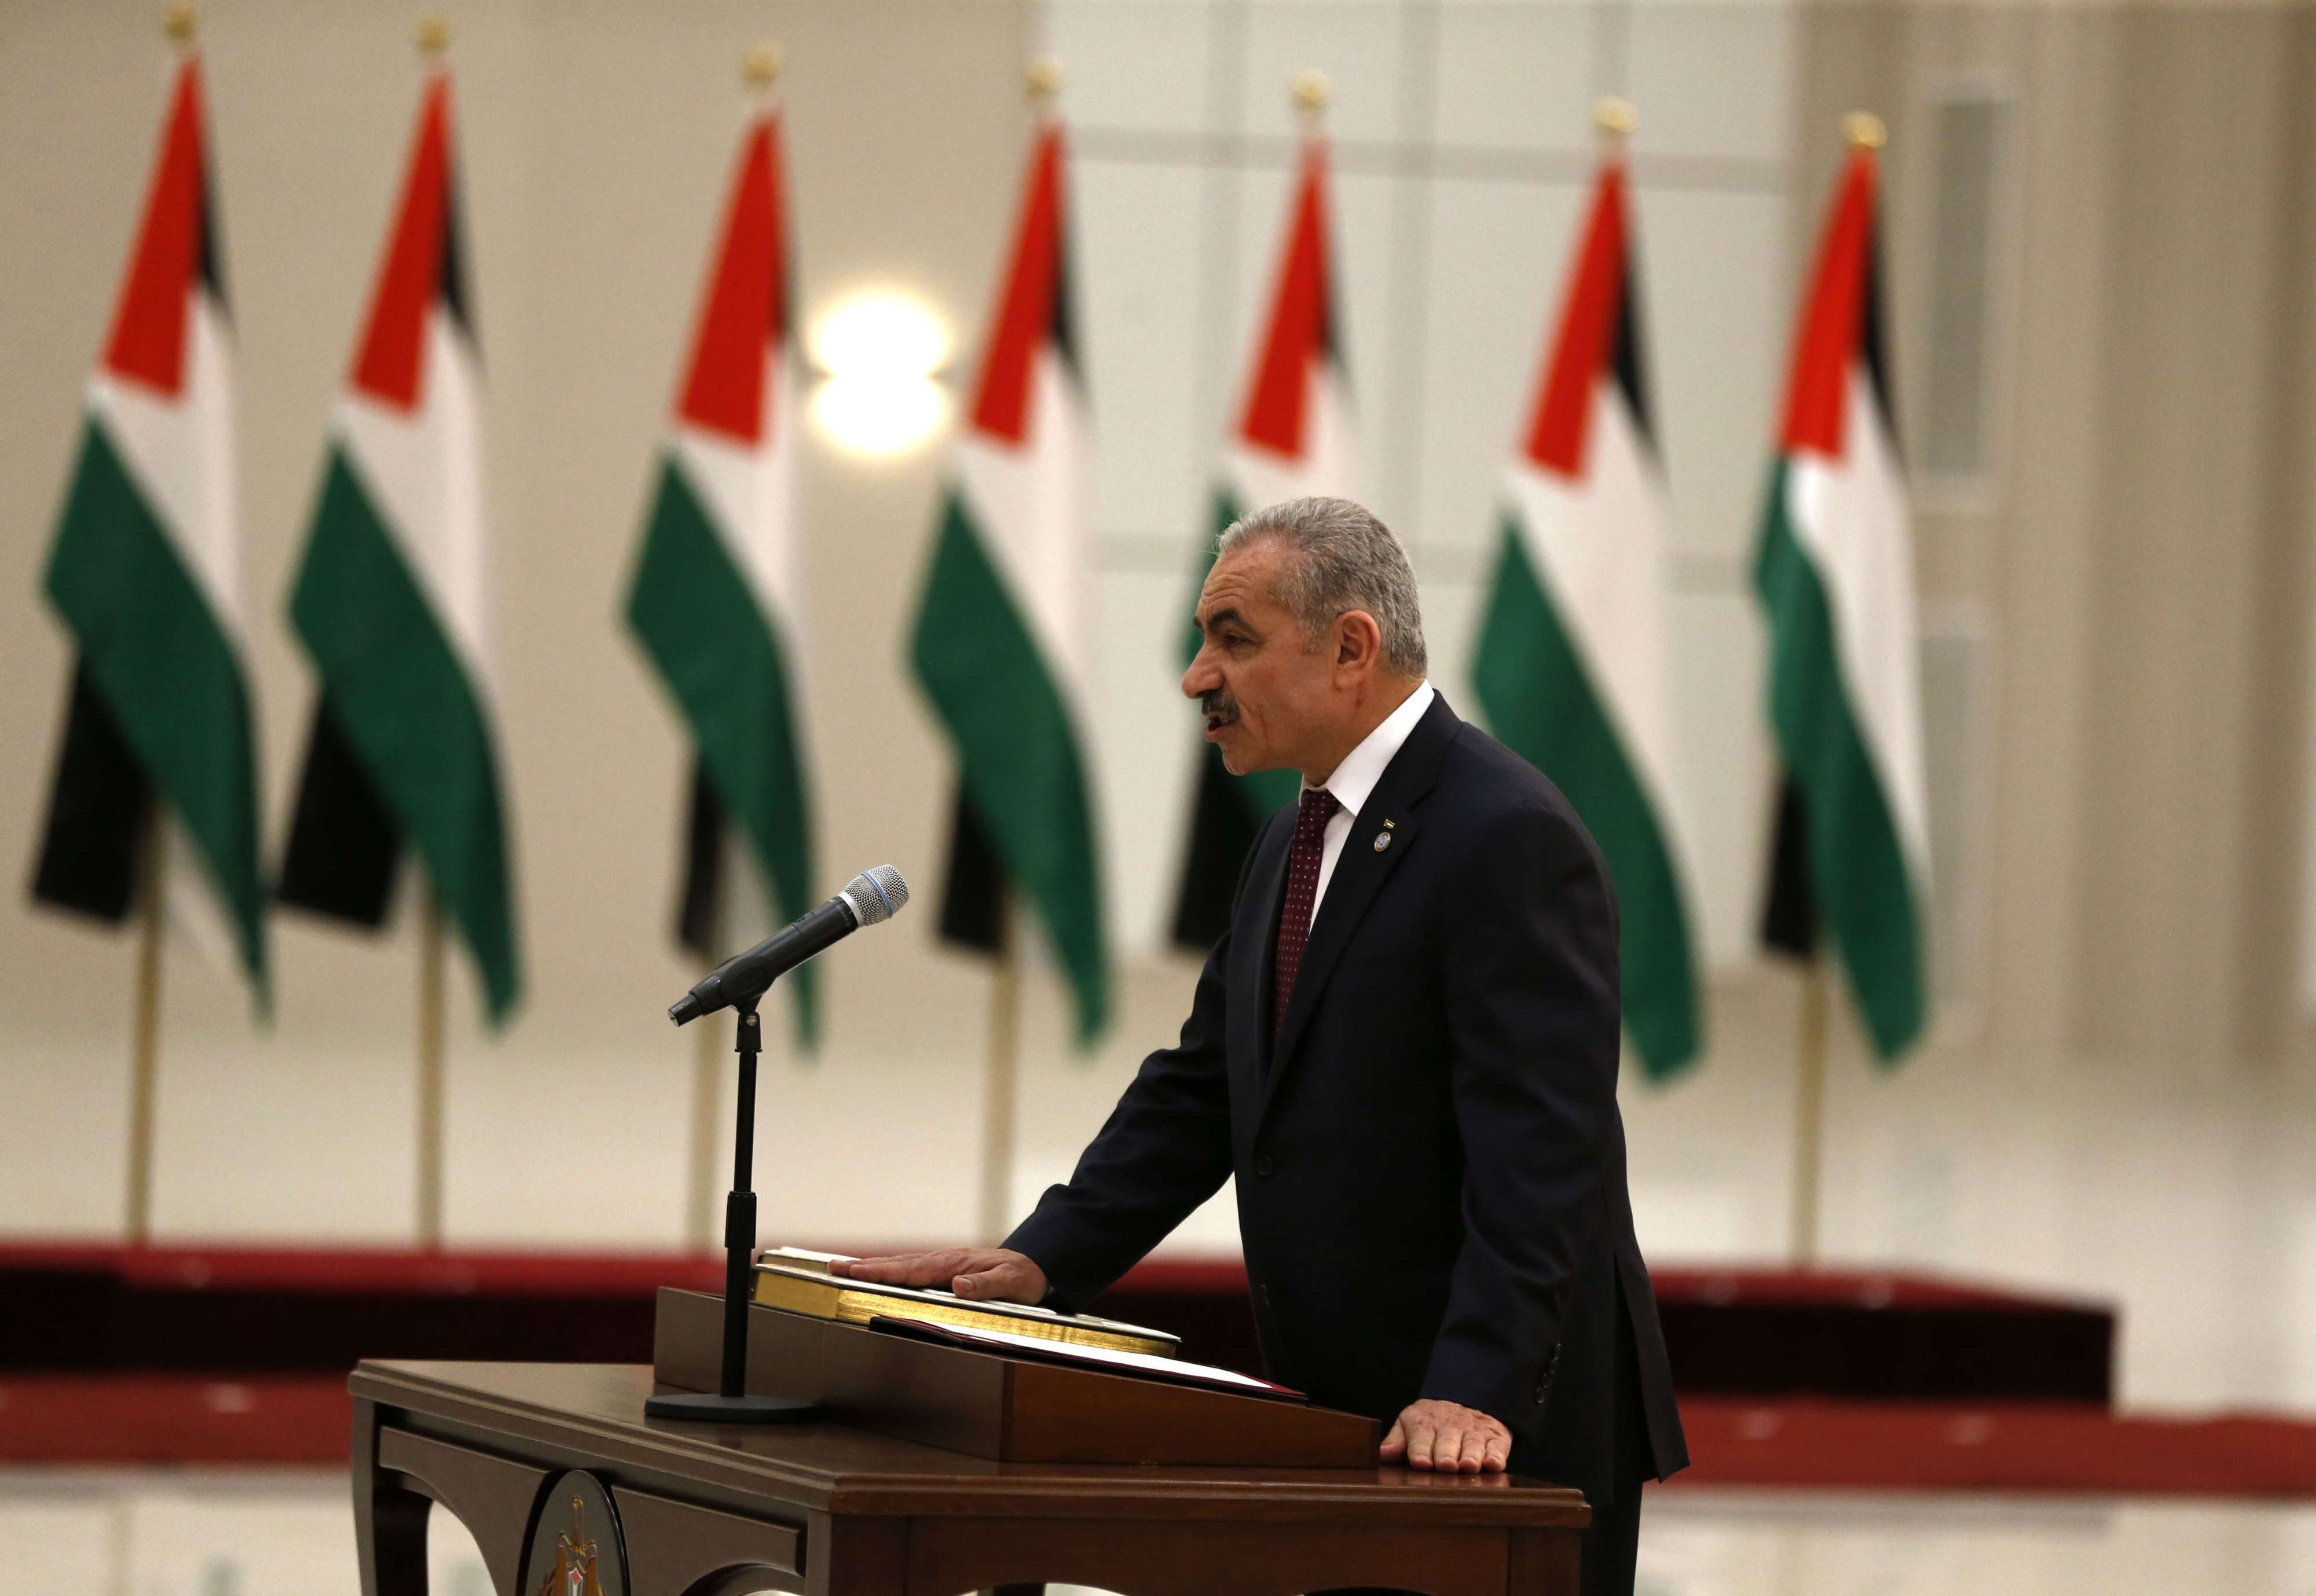 Shtayyeh reiterated Palestinians' core demands for a two-state peace deal with Israel